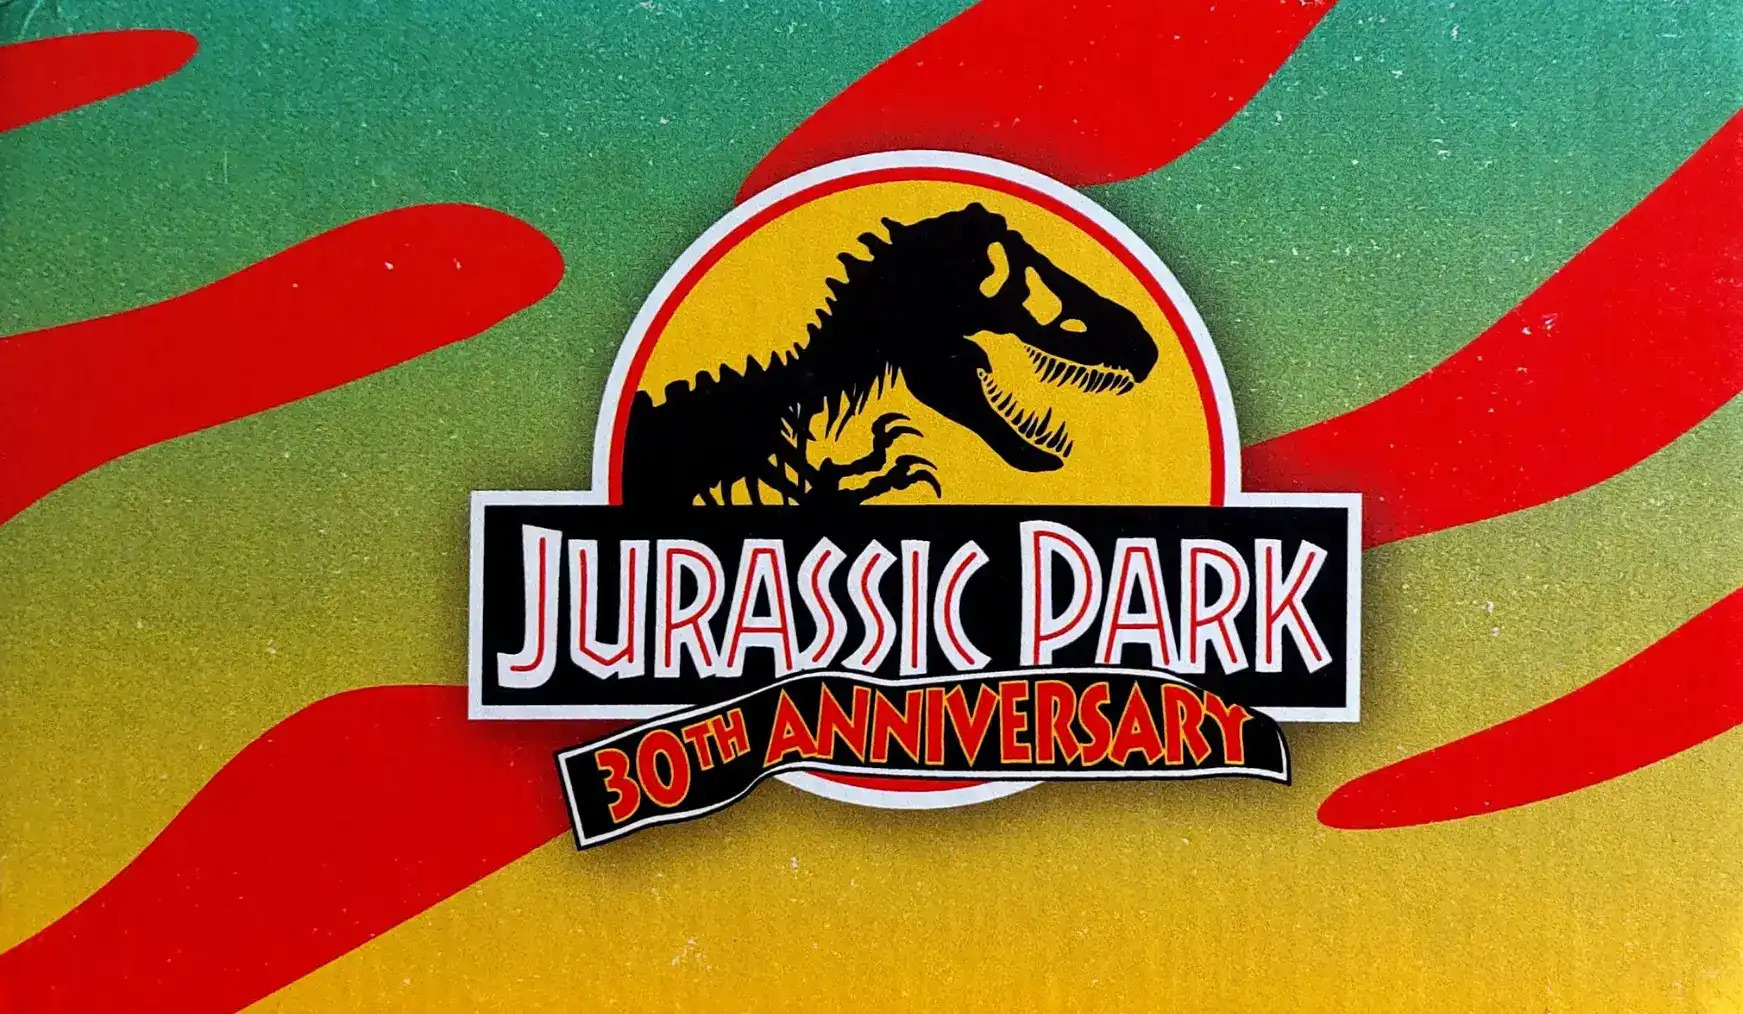 32 Facts about the movie Jurassic World 